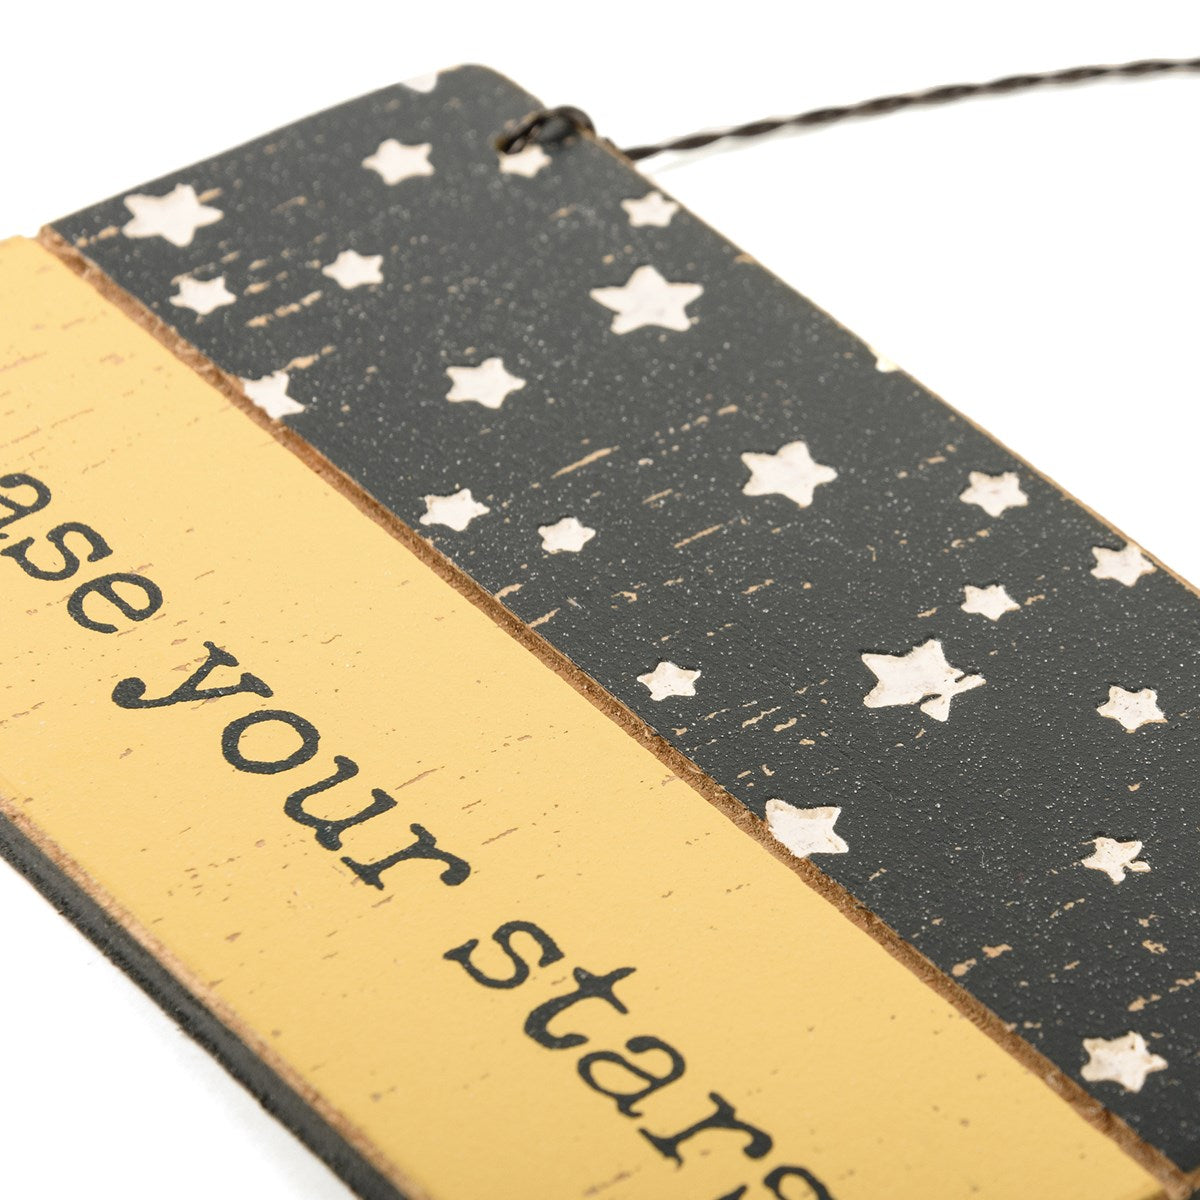 Chase Your Stars Wooden Ornament